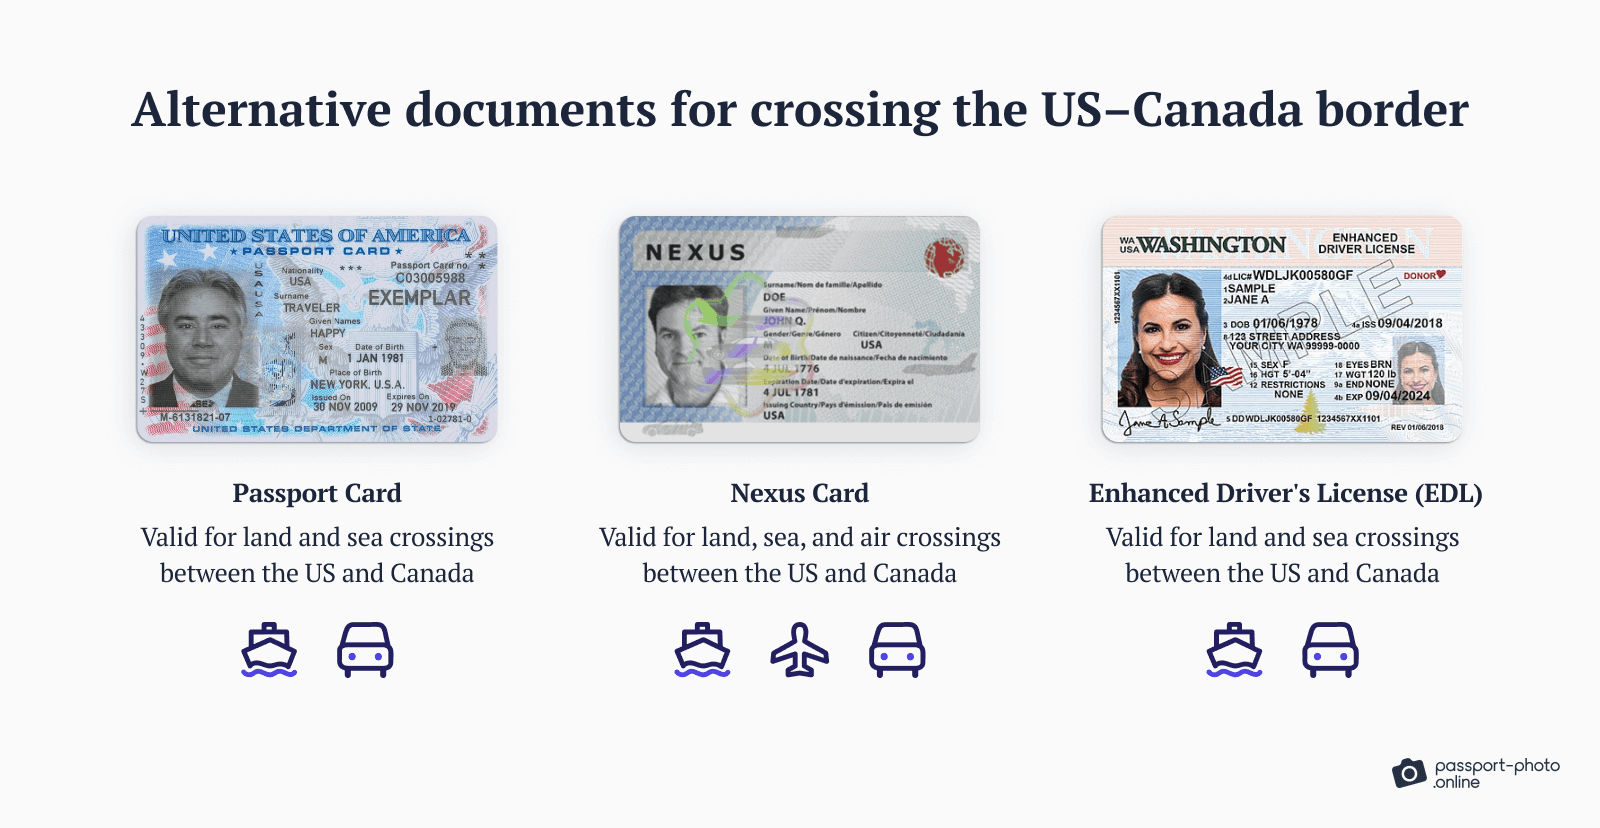 can i enter canada with an enhanced driver's license